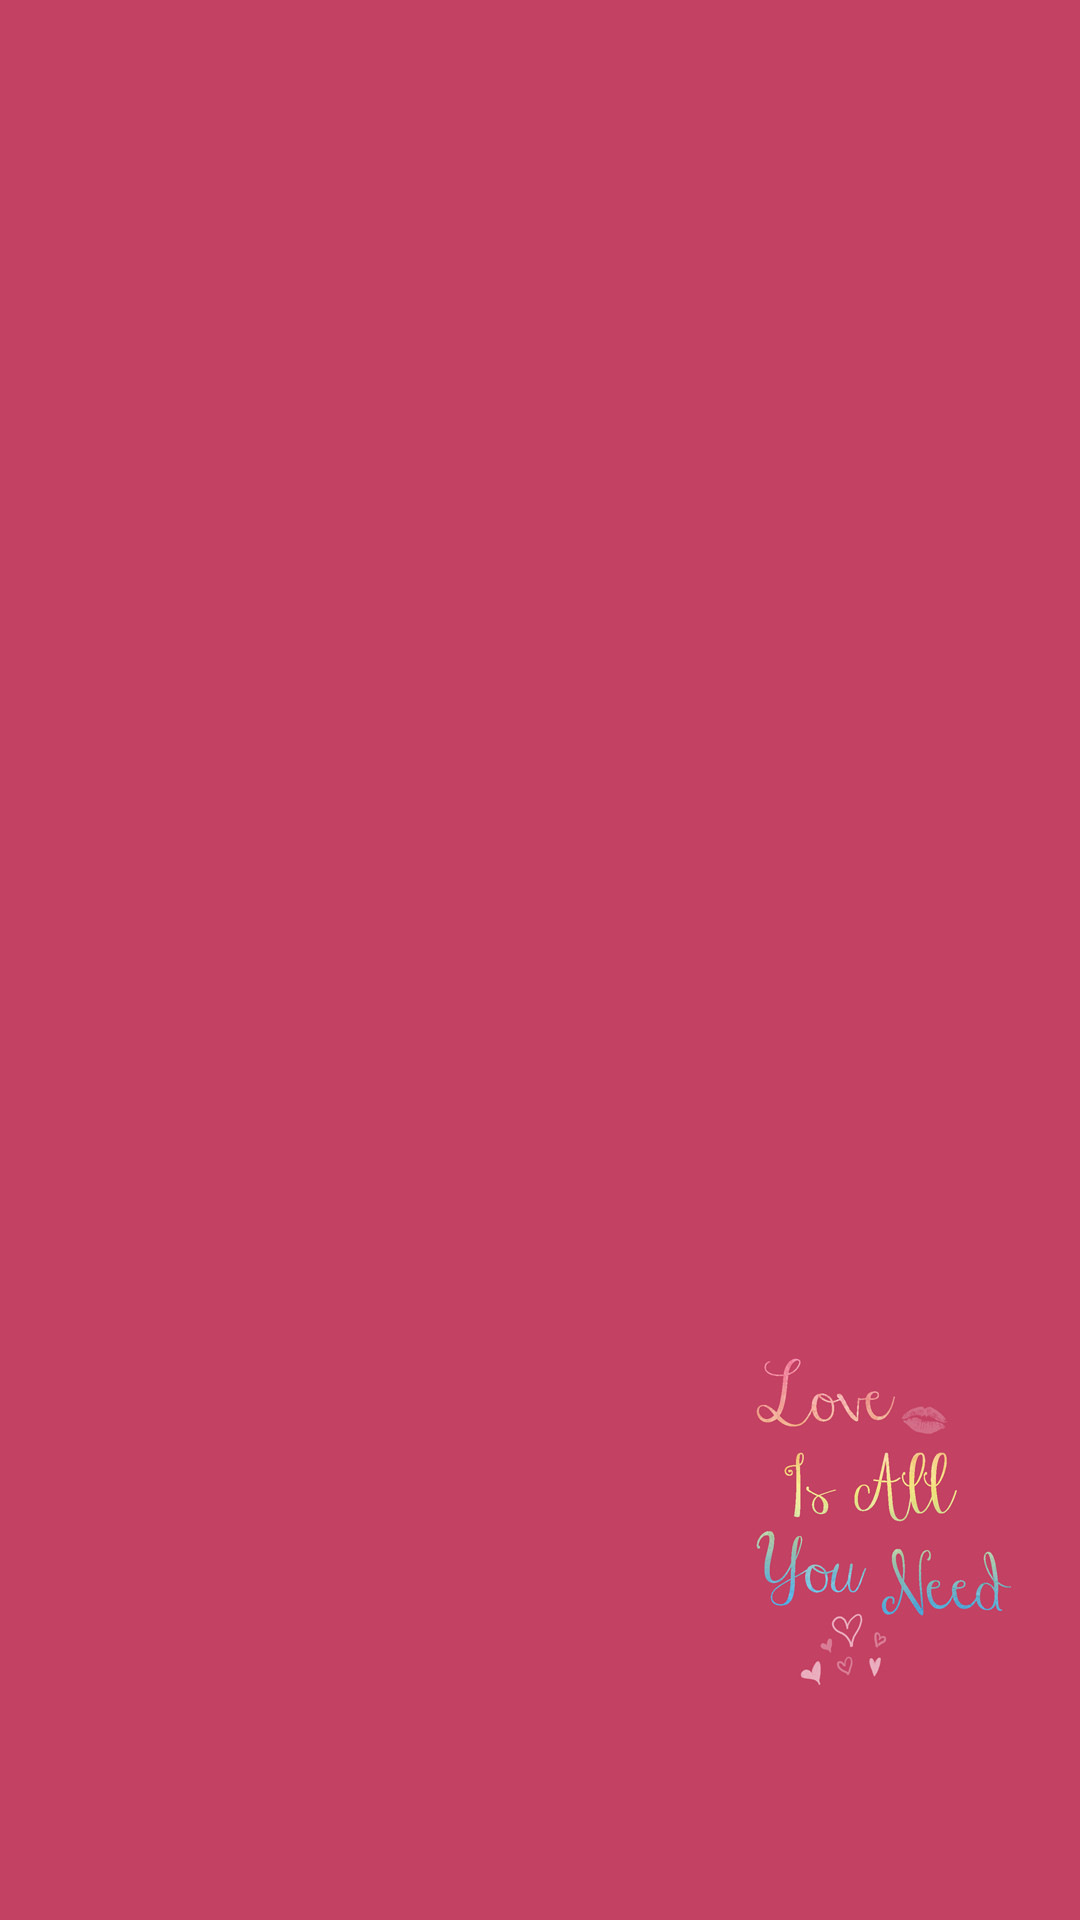 Quote Love Lips Rouge Iphone Wallpaper Pink Home Screen - Iphone X Wallpaper Quotes - HD Wallpaper 